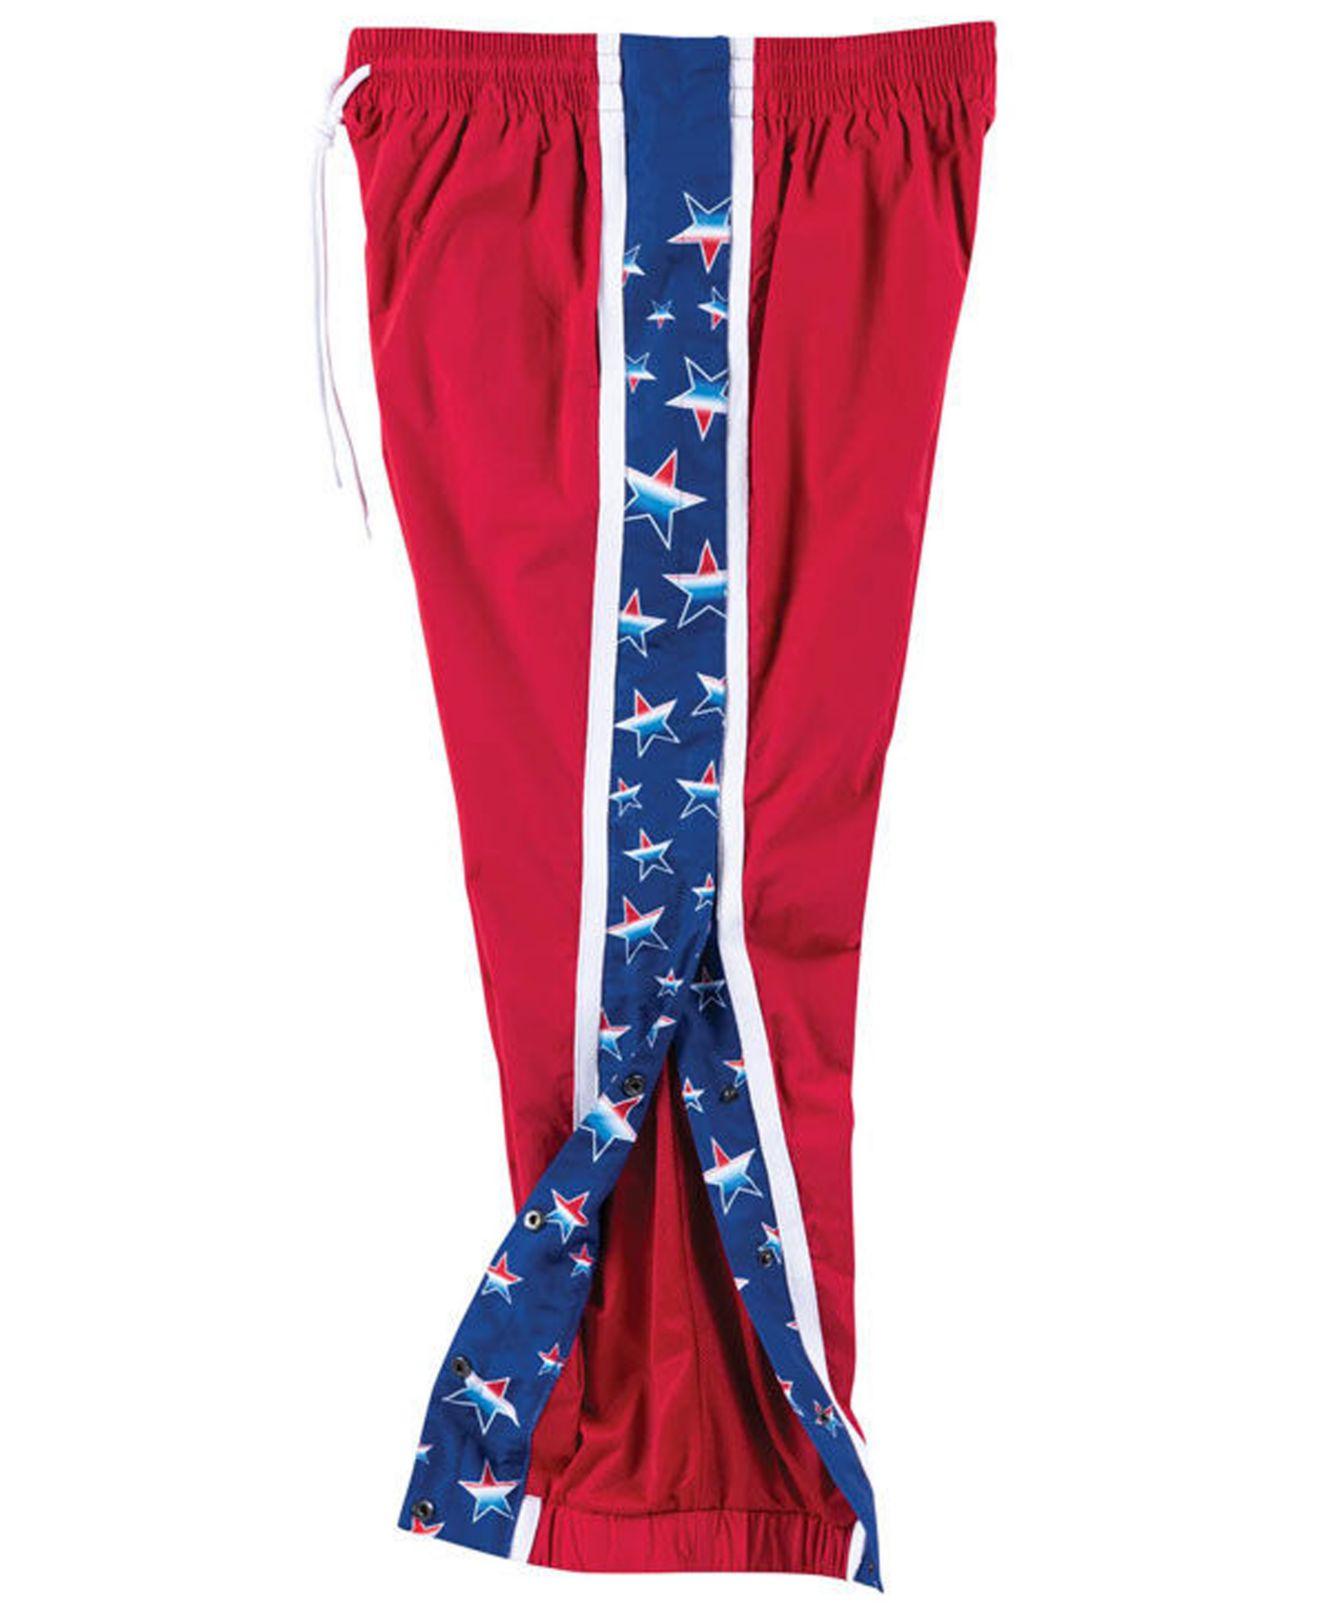 Mitchell & Ness Philadelphia 76ers Tear Away Jogger Pants in Red